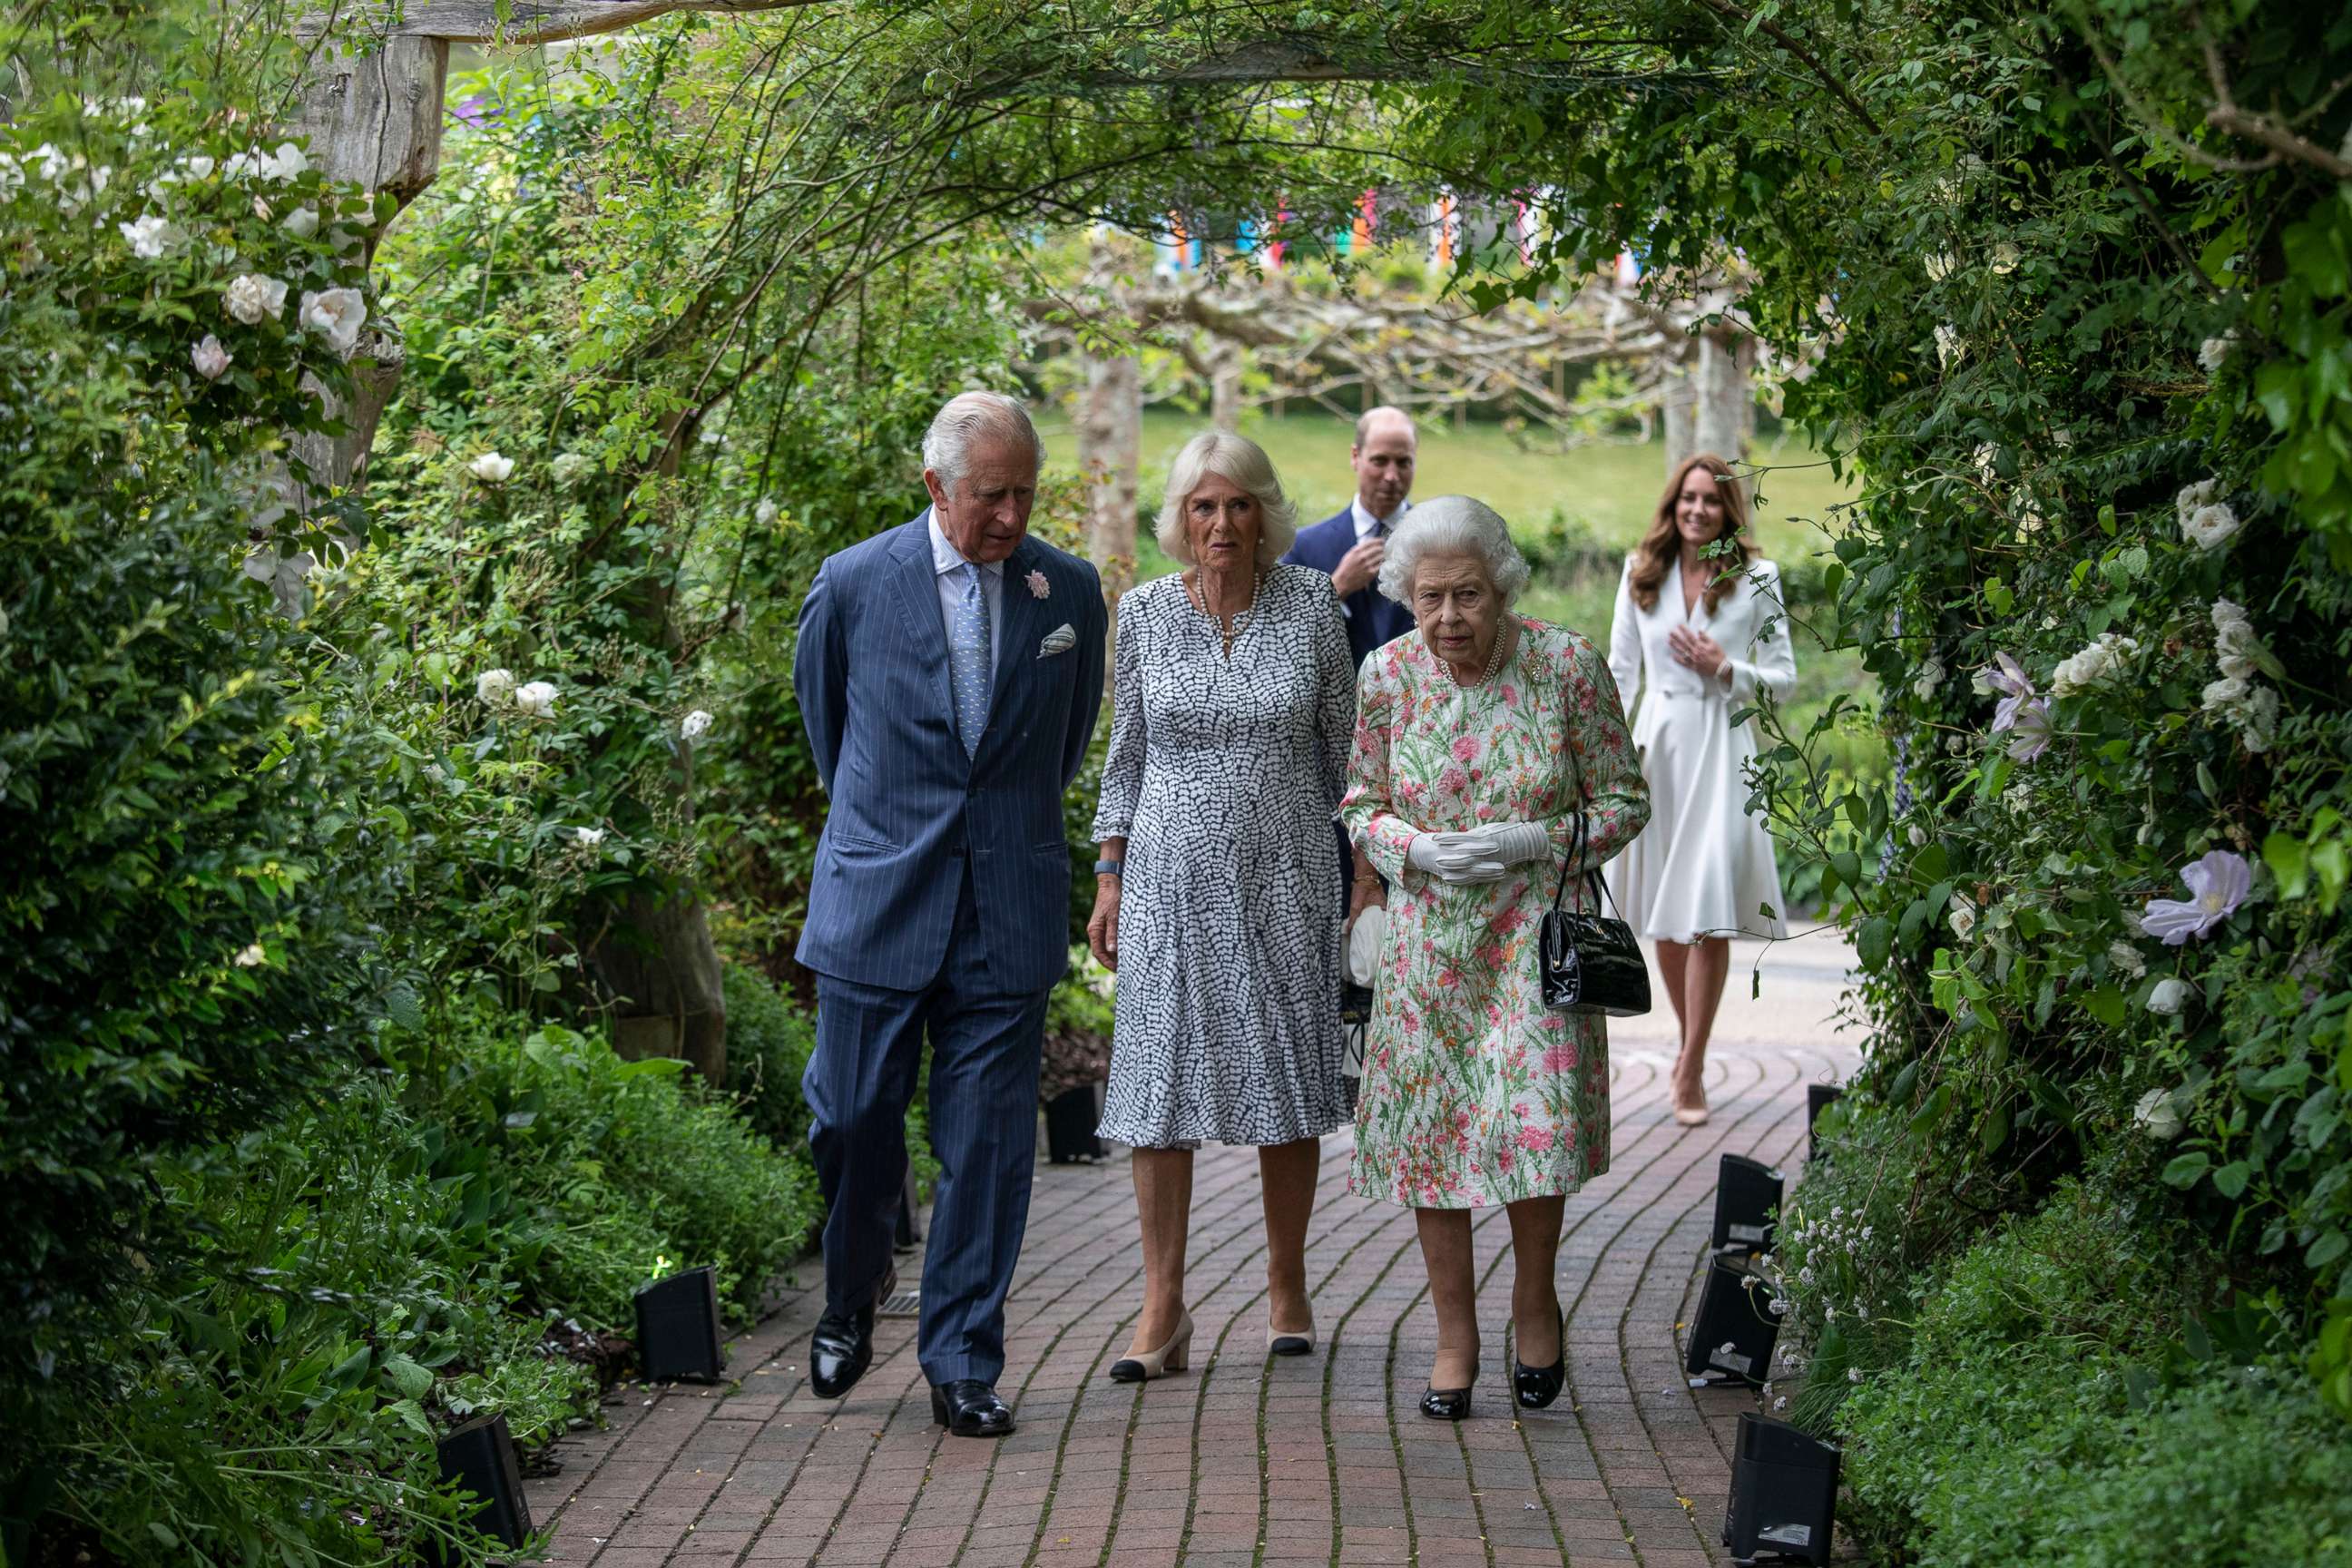 PHOTO: Prince Charles, Prince of Wales, Camilla, Duchess of Cornwall, Queen Elizabeth II, Prince William, Duke of Cambridge and Catherine, Duchess of Cambridge arrive for a drinks reception on June 11, 2021 in St Austell, Cornwall, England.